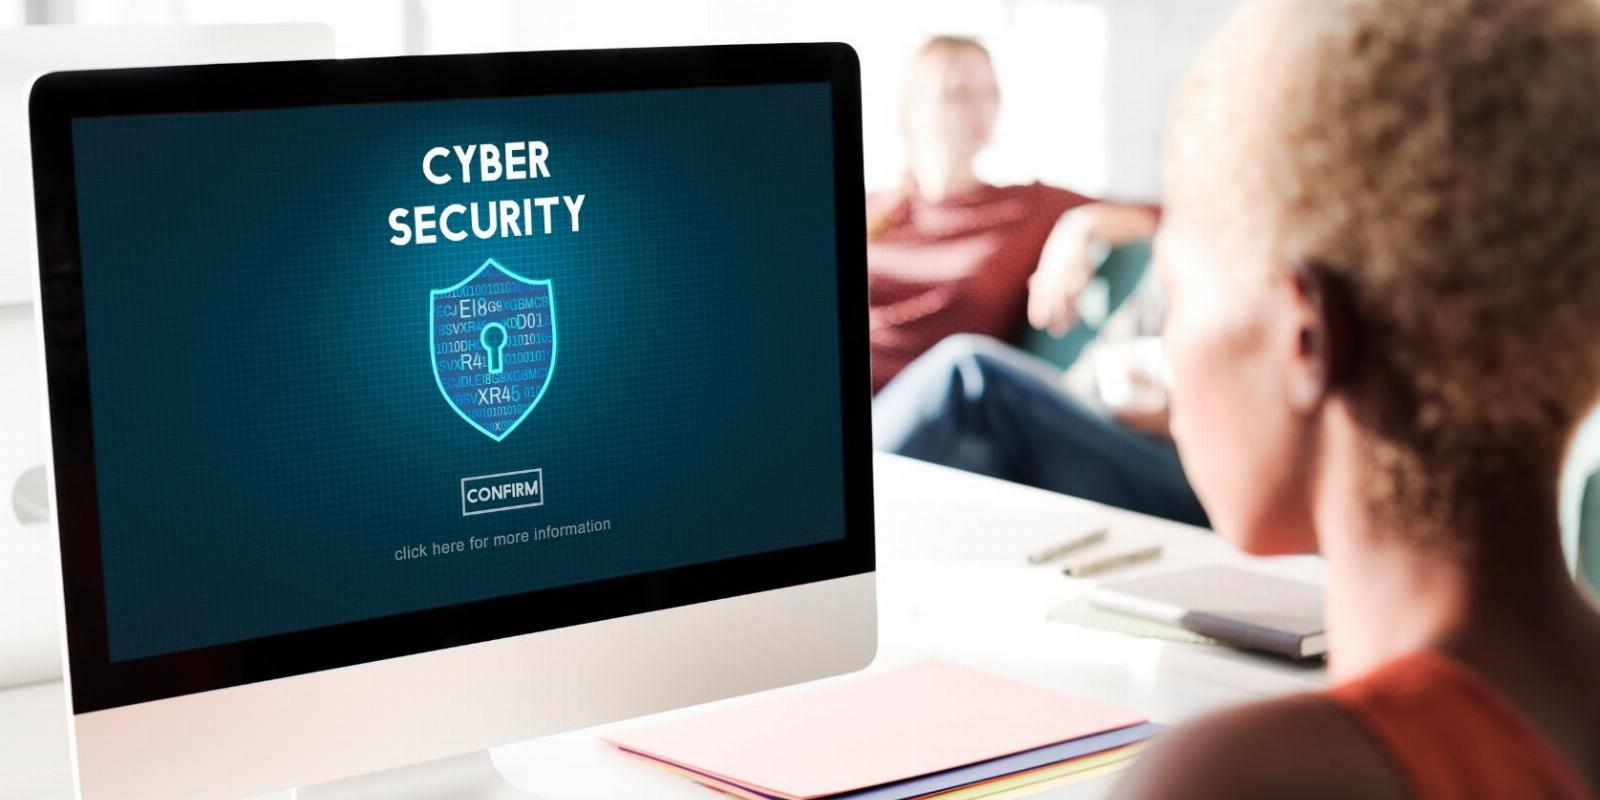 Can a Cybersecurity Awareness Course Keep You Safe Online?